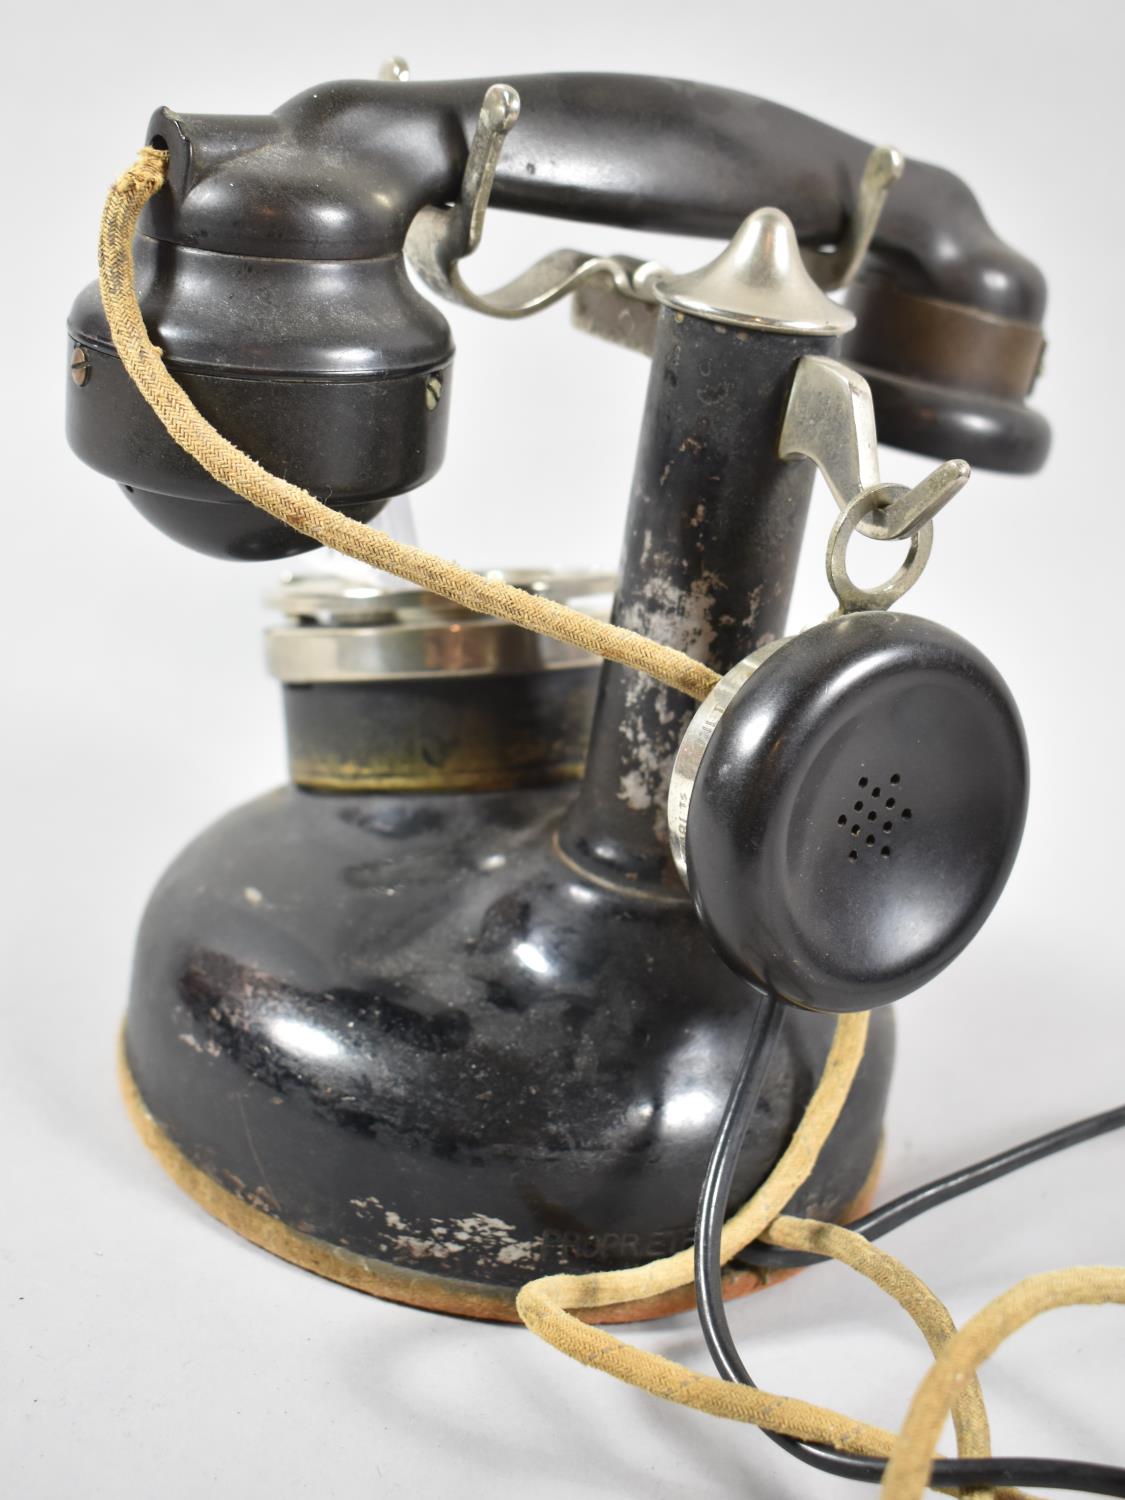 A Vintage French Telephone with Secondary Listening Device, 22cm high - Image 3 of 4